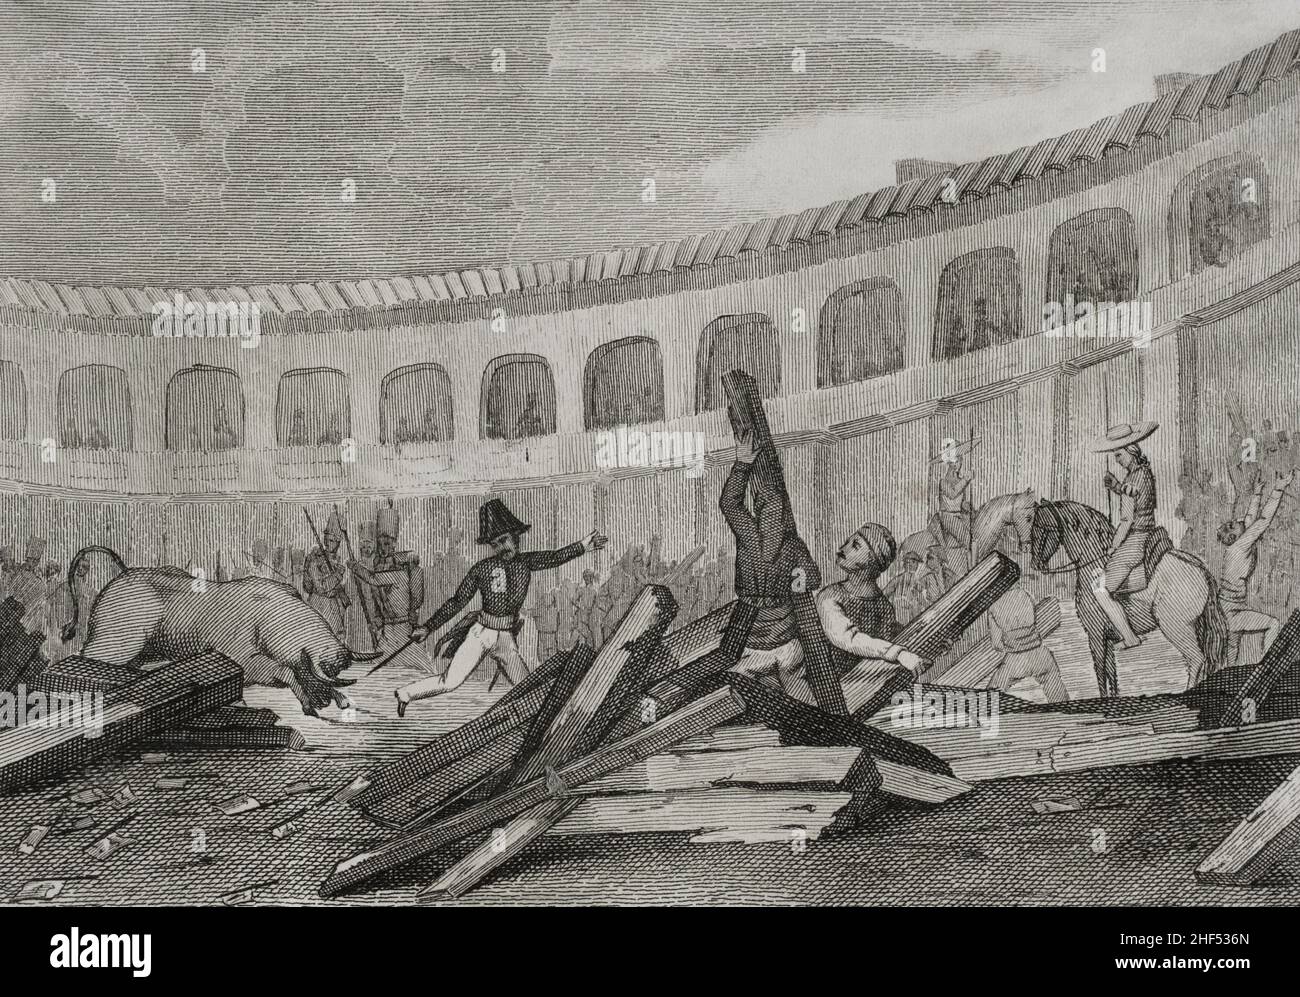 History of Spain. Catalonia. First Carlist War (1833-1840). Anti-clerical riots of 1835. Revolts against the religious orders that took place as a result of their support for the Carlist side. 'Bullanga' of Barcelona (25 July 1835). Violent protest in the El Torín bullring in Barceloneta. During the bullfighting performance, protests against the poor quality of the bulls led to a violent reaction, first in the bullring and later in the streets of the city. In the bleachers there were two rival bullfighting groups, some supporters of the Carlists and the other of the Liberals. After the fifth b Stock Photo